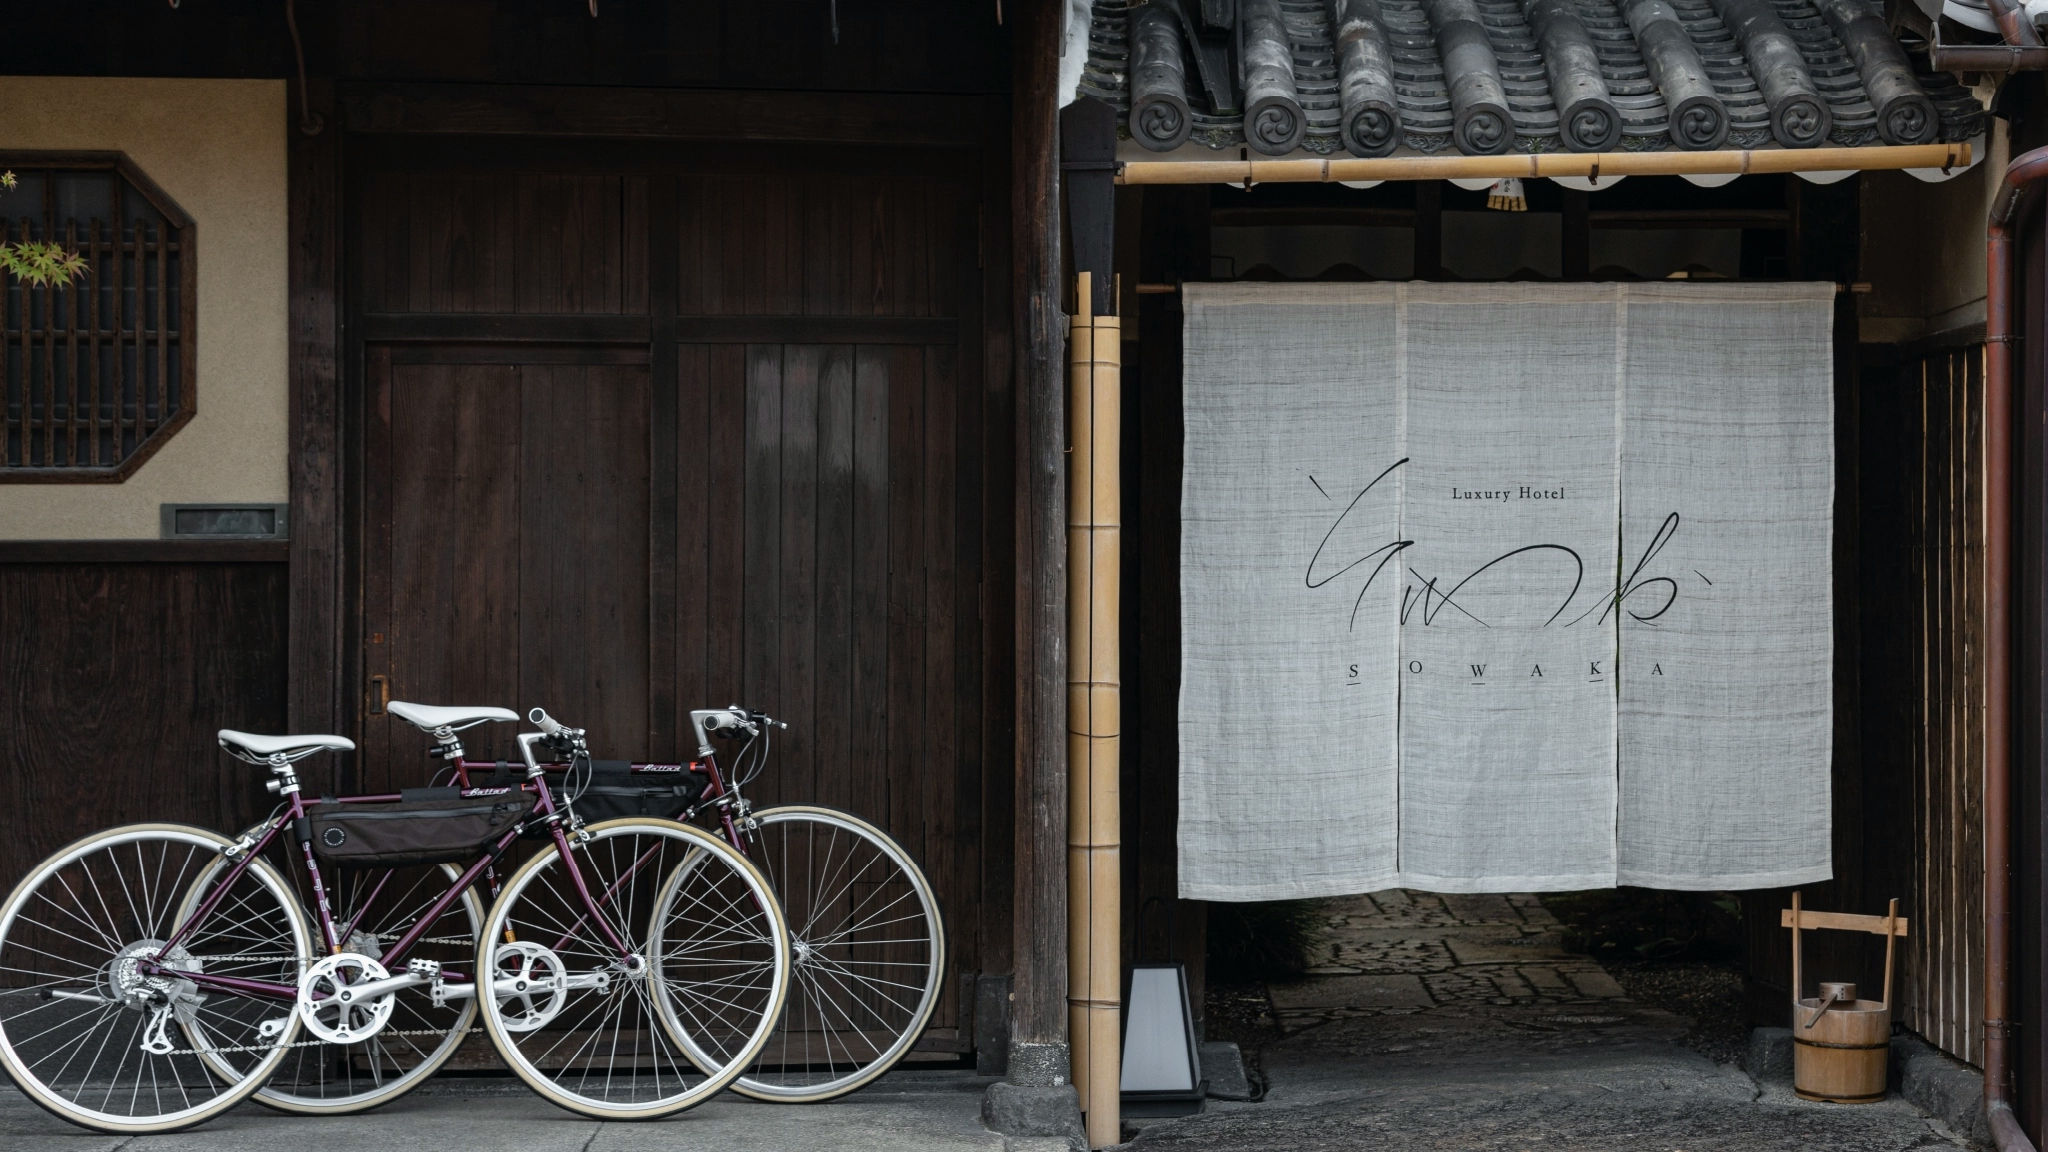 Entrance of SOWAKA, with the noren (curtain) and two bicycles outside.